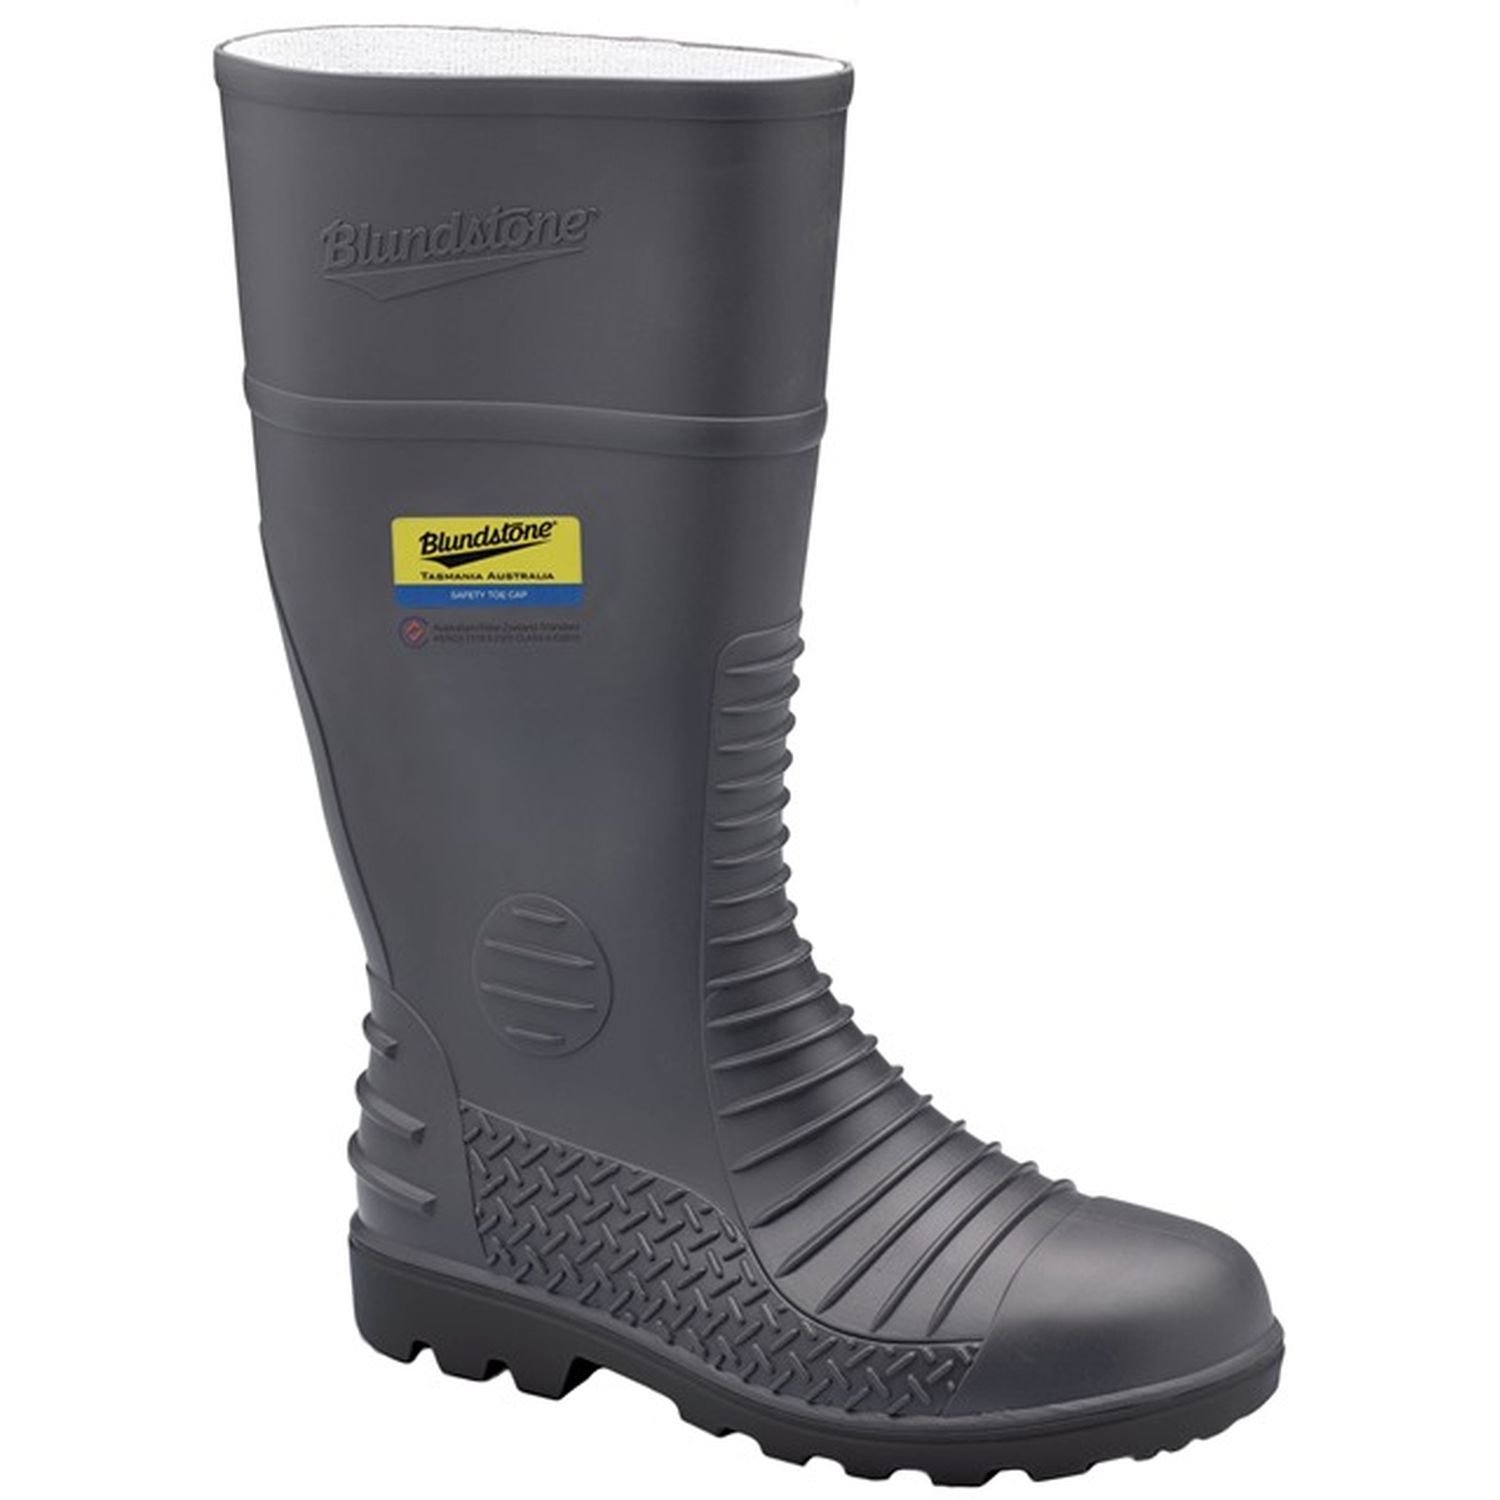 Blundstone Comfort Arch Safety Gumboot Grey